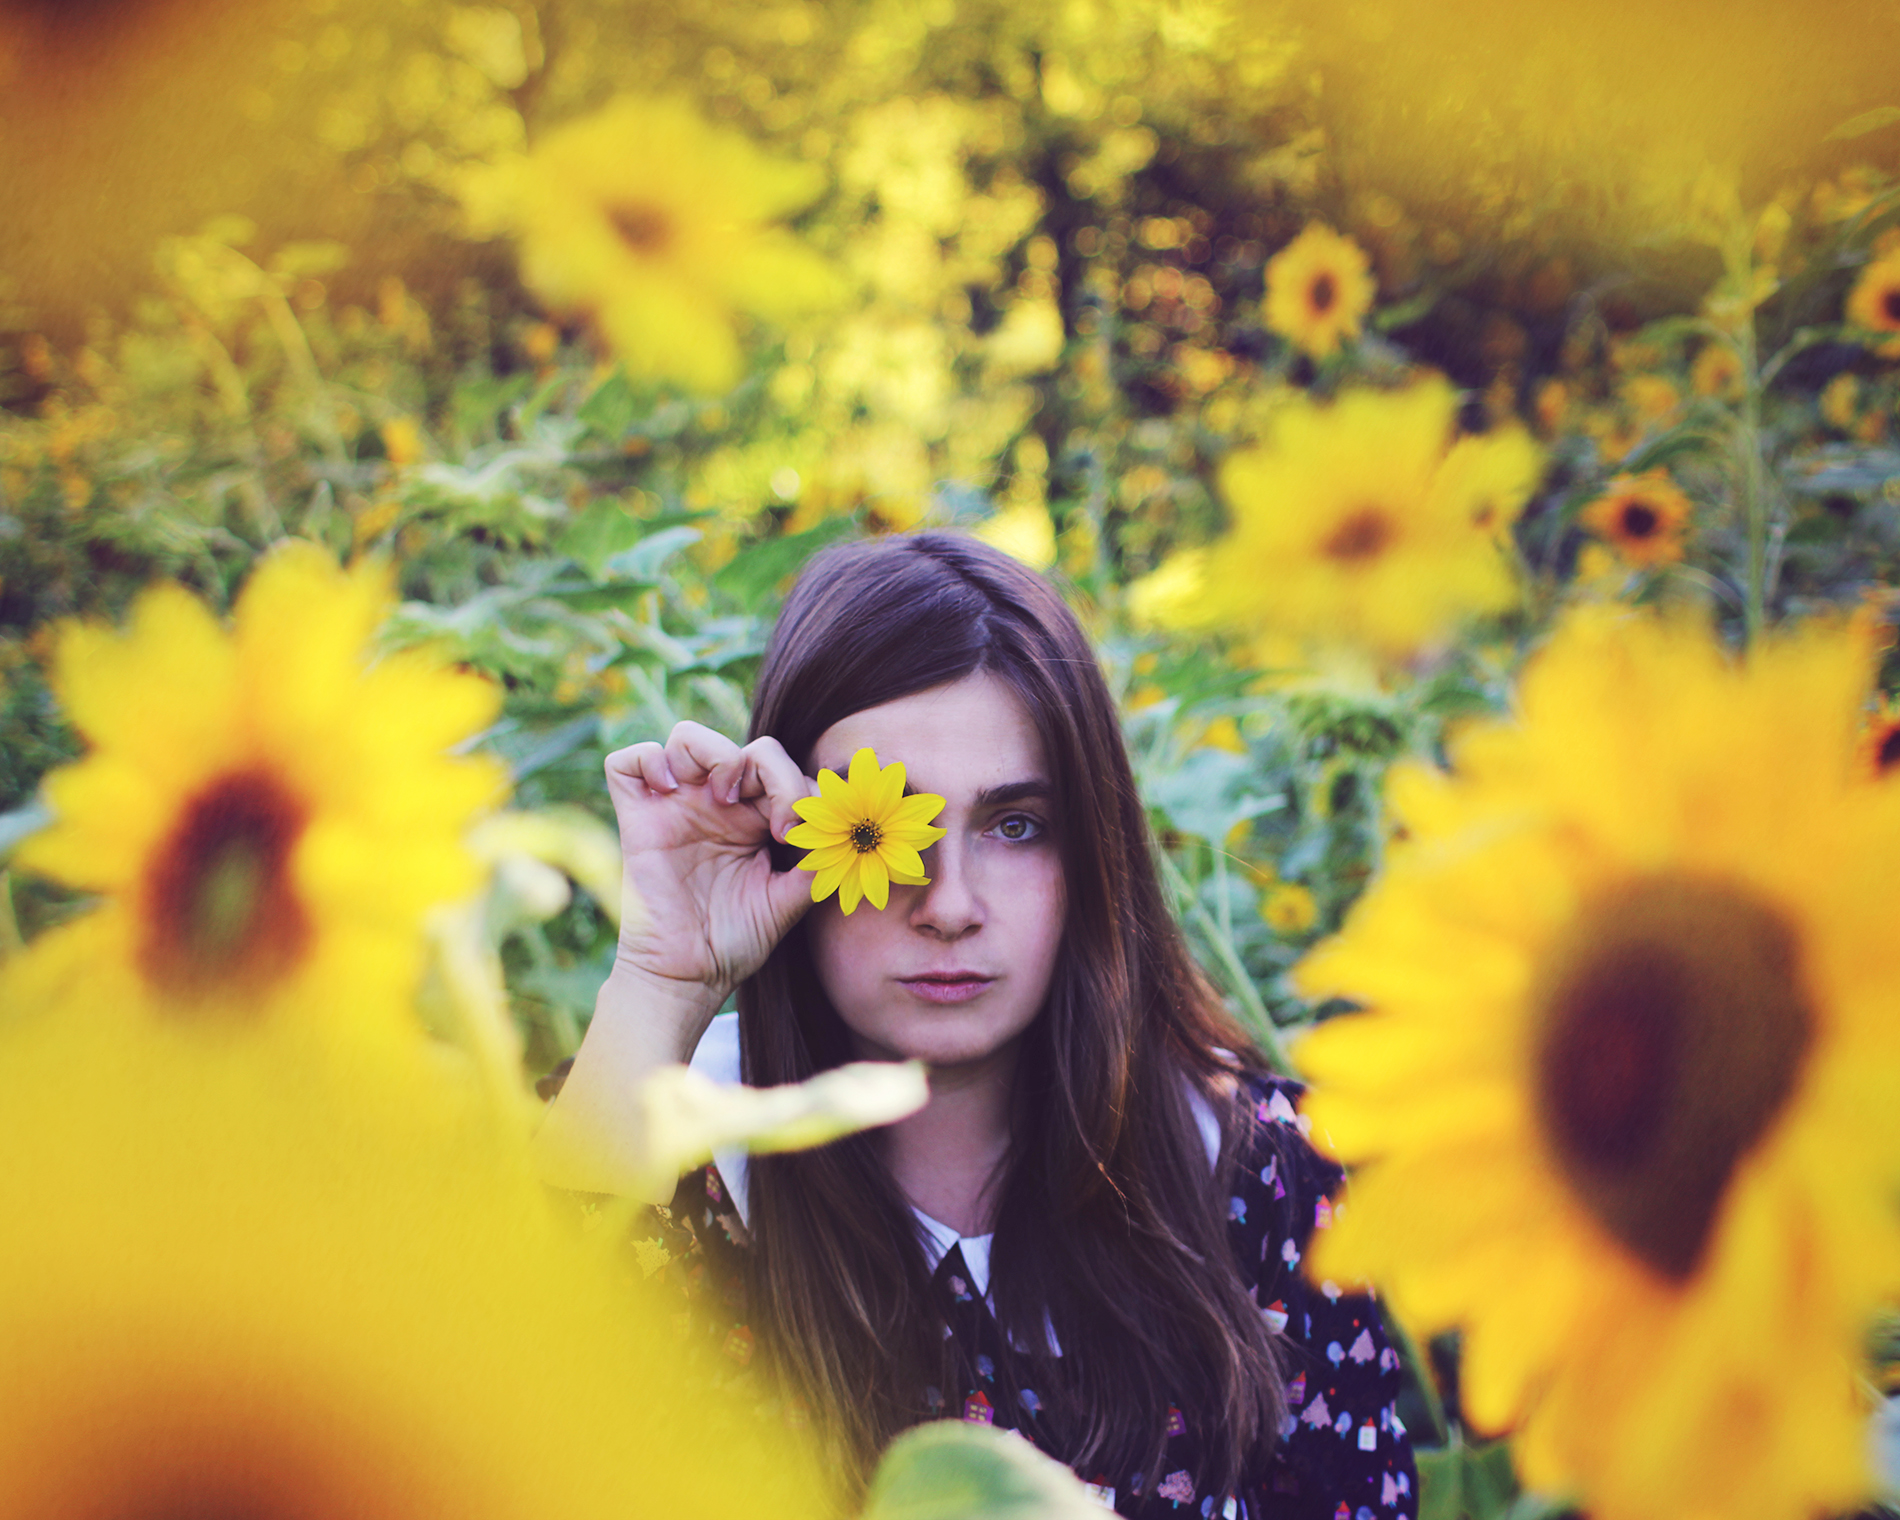 A woman in a sunflower field holding a sunflower in front of her eye.